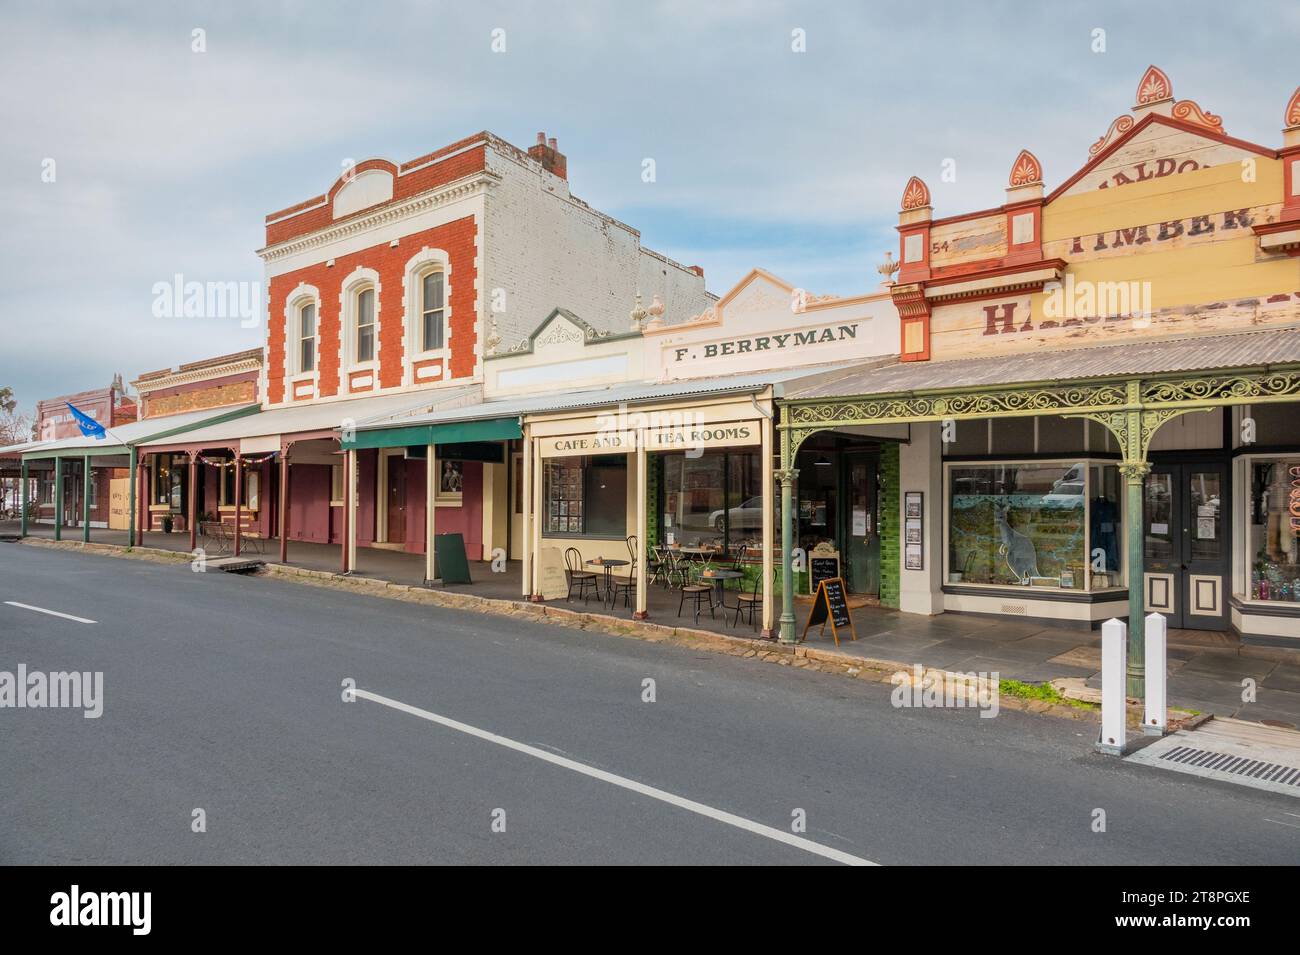 Wrought iron and ornate veranda posts in front of old buildings facades in an historic streetscape at Maldon in Central Victoria, Australia Stock Photo